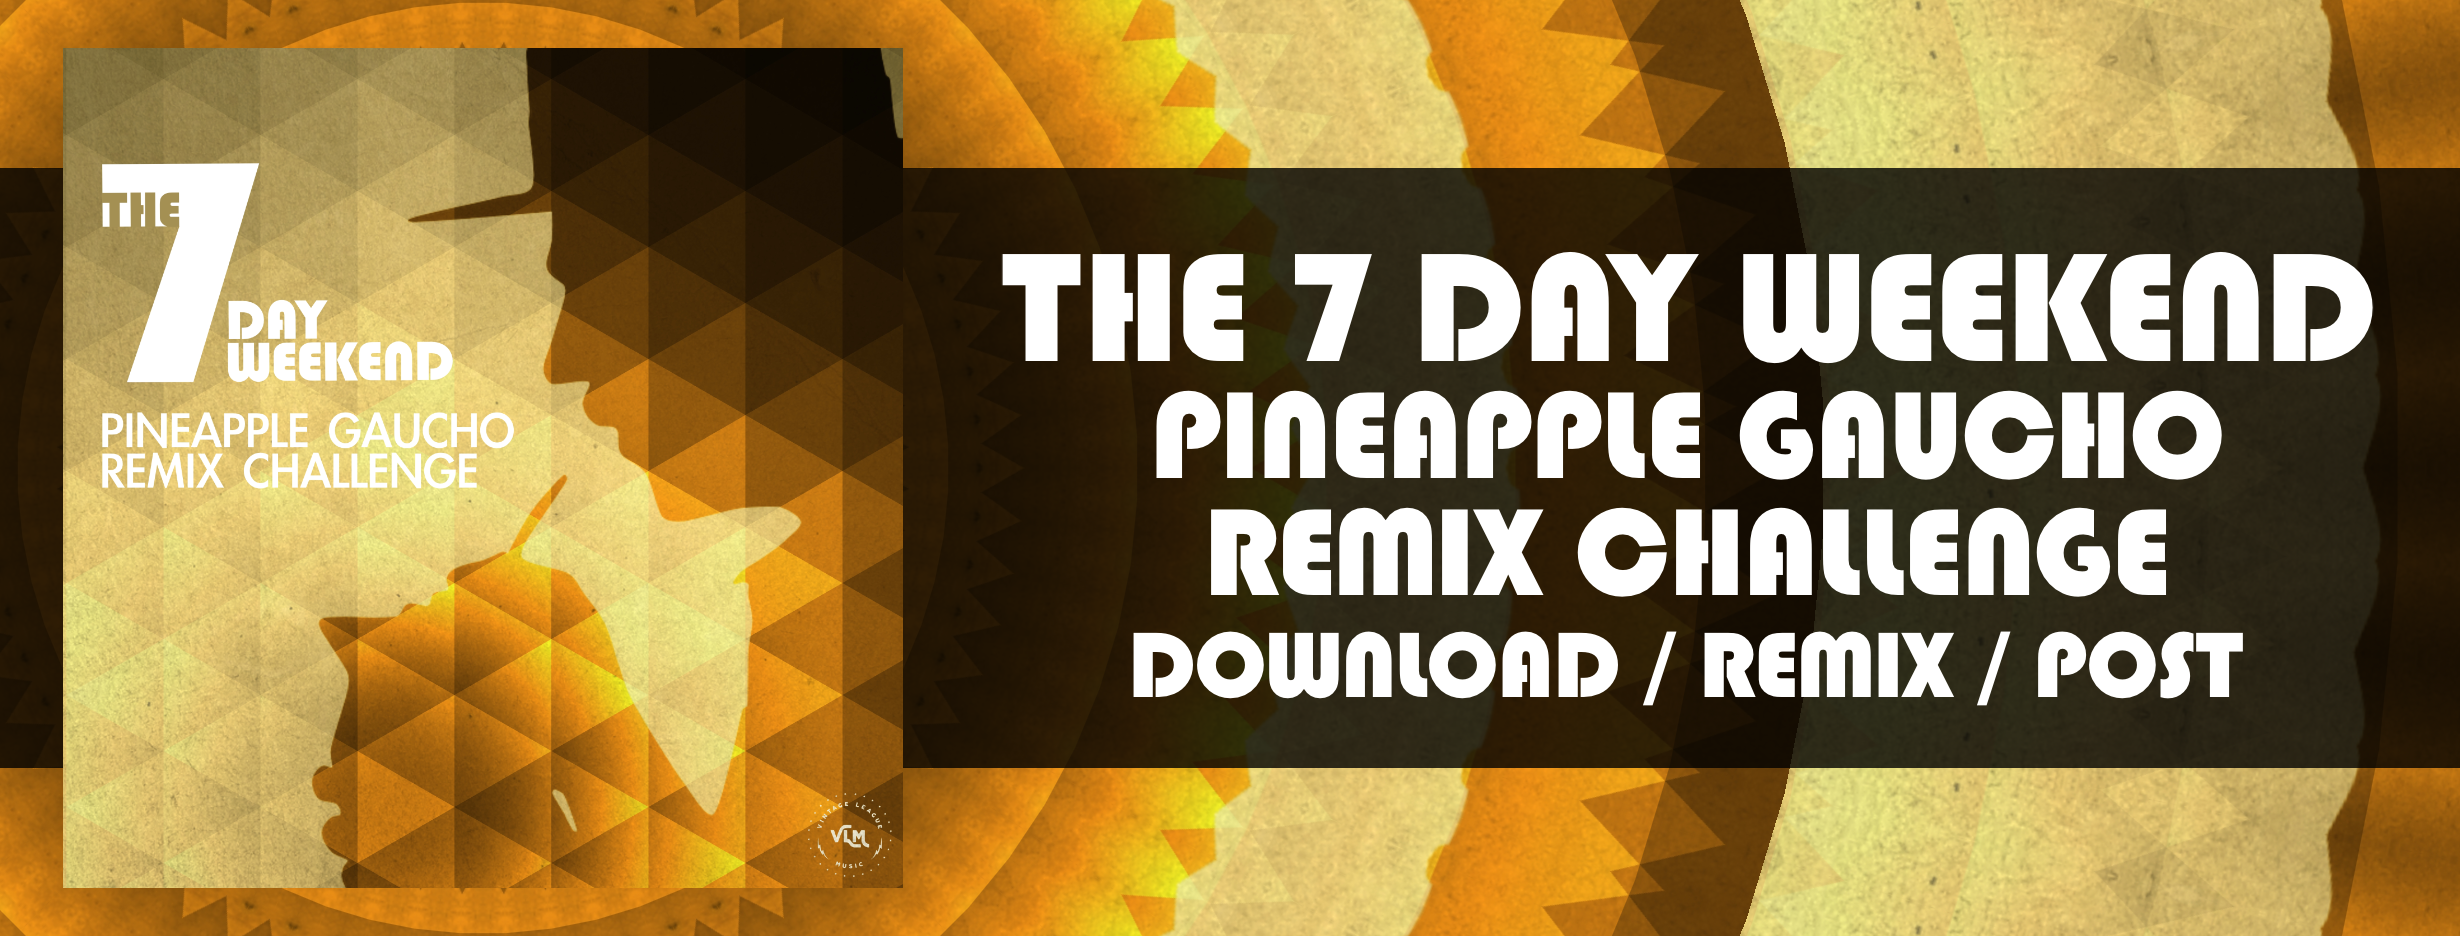 The 7 Day Weekend - Pineapple Gaucho Remix Challenge Banner@3x.png